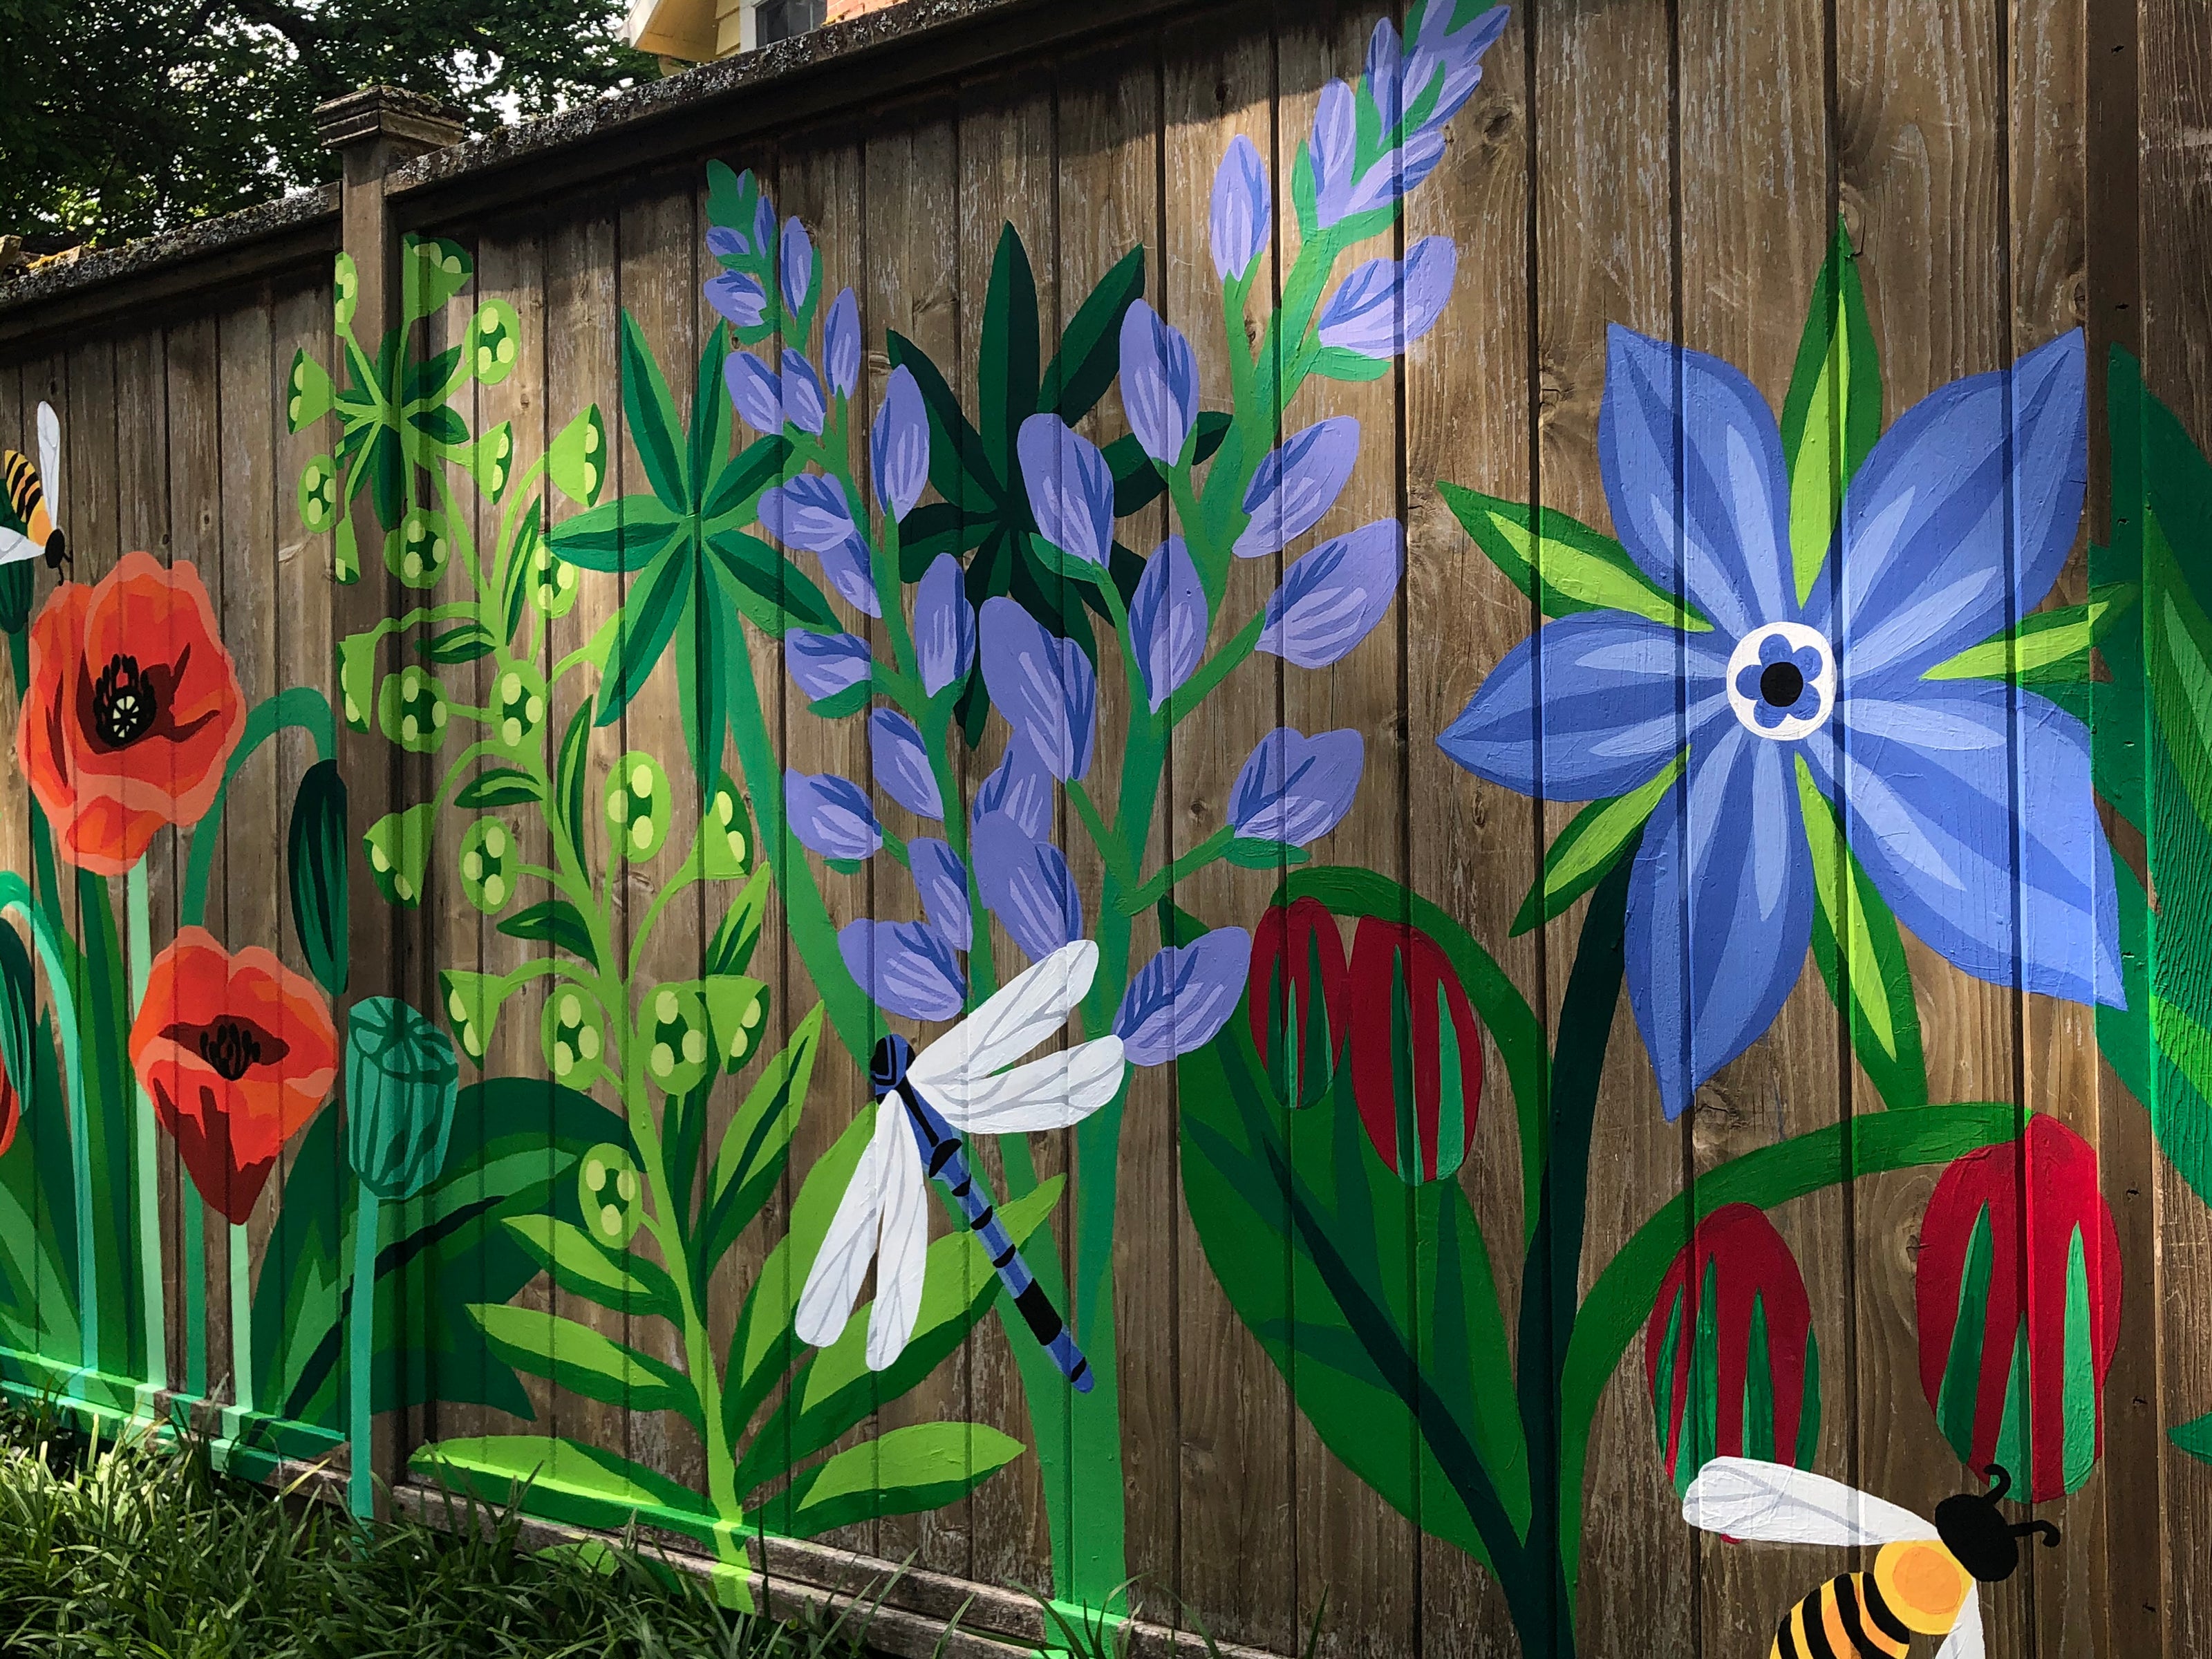 Wildflowers mural on a fence with dragonflies and bees